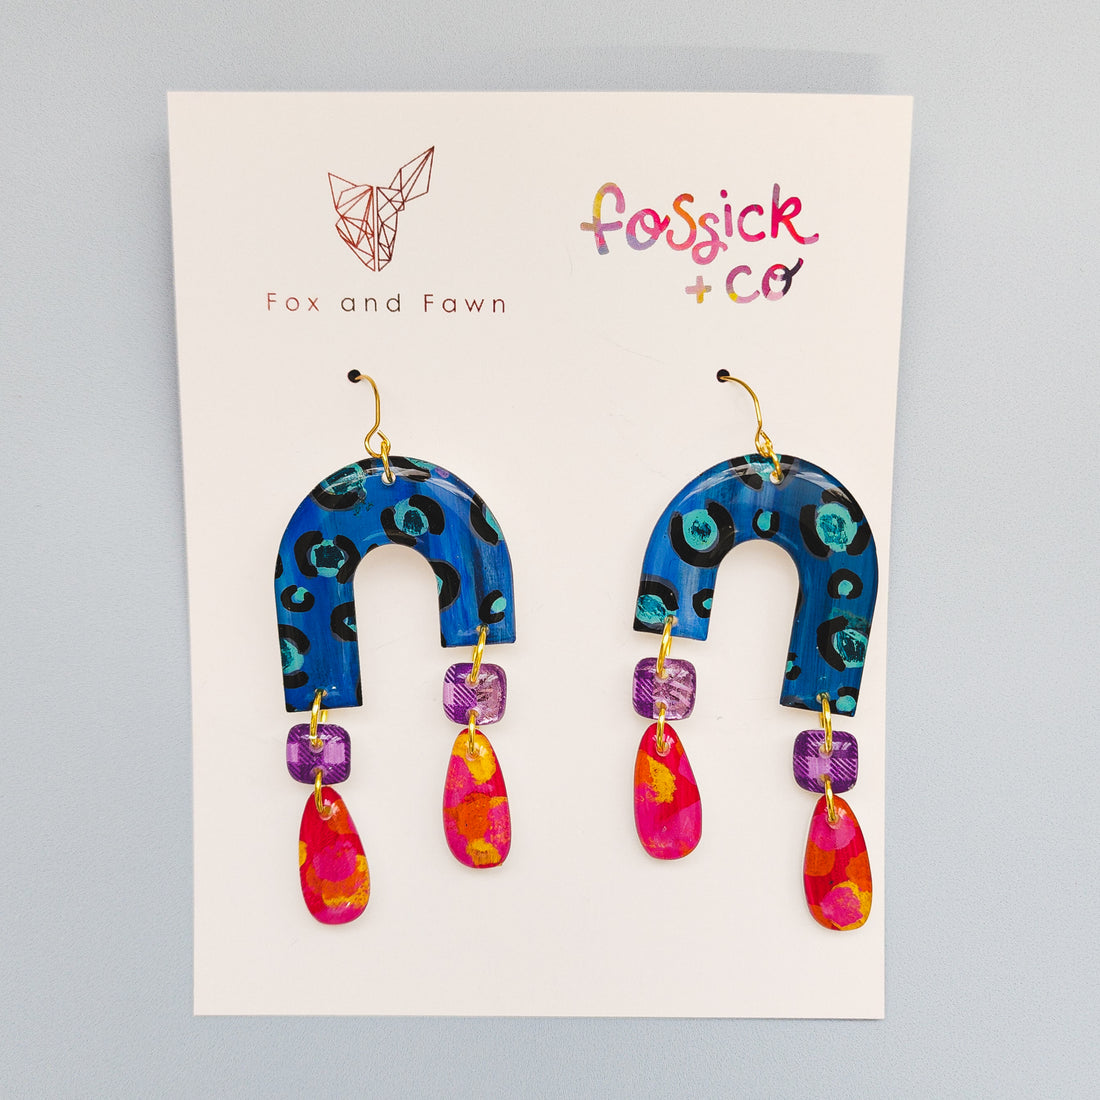 Fox &amp; Fawn x Fossick Fanciful Collection - Bit of Crumpet